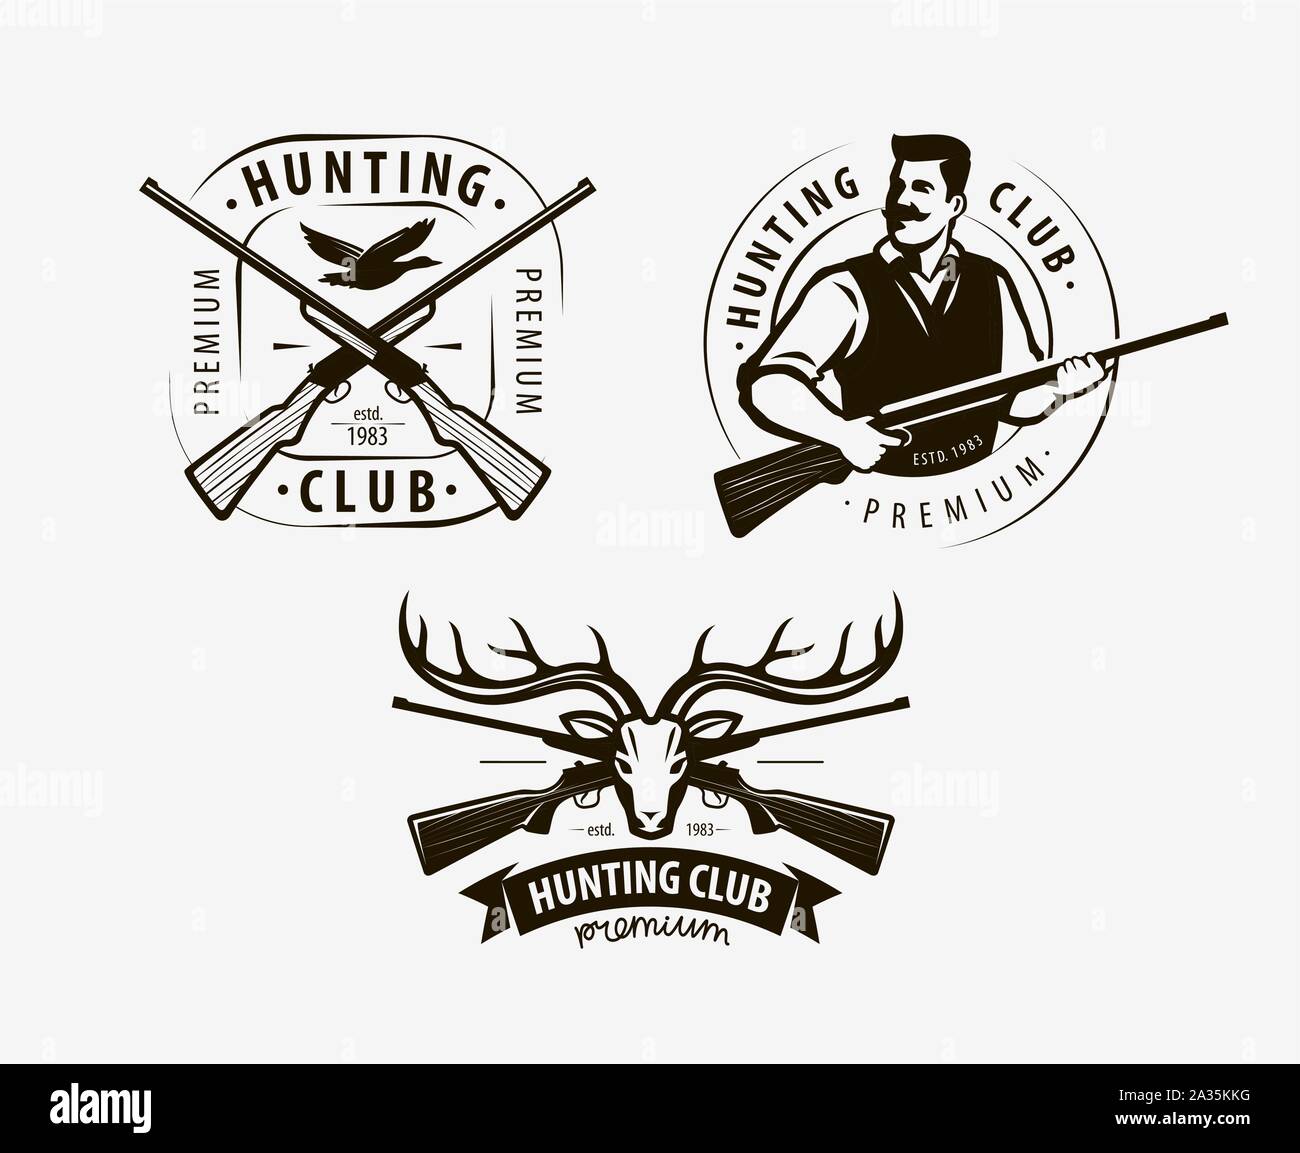 Hunting club set of labels. Hunt logo, icon. Vector illustration Stock Vector